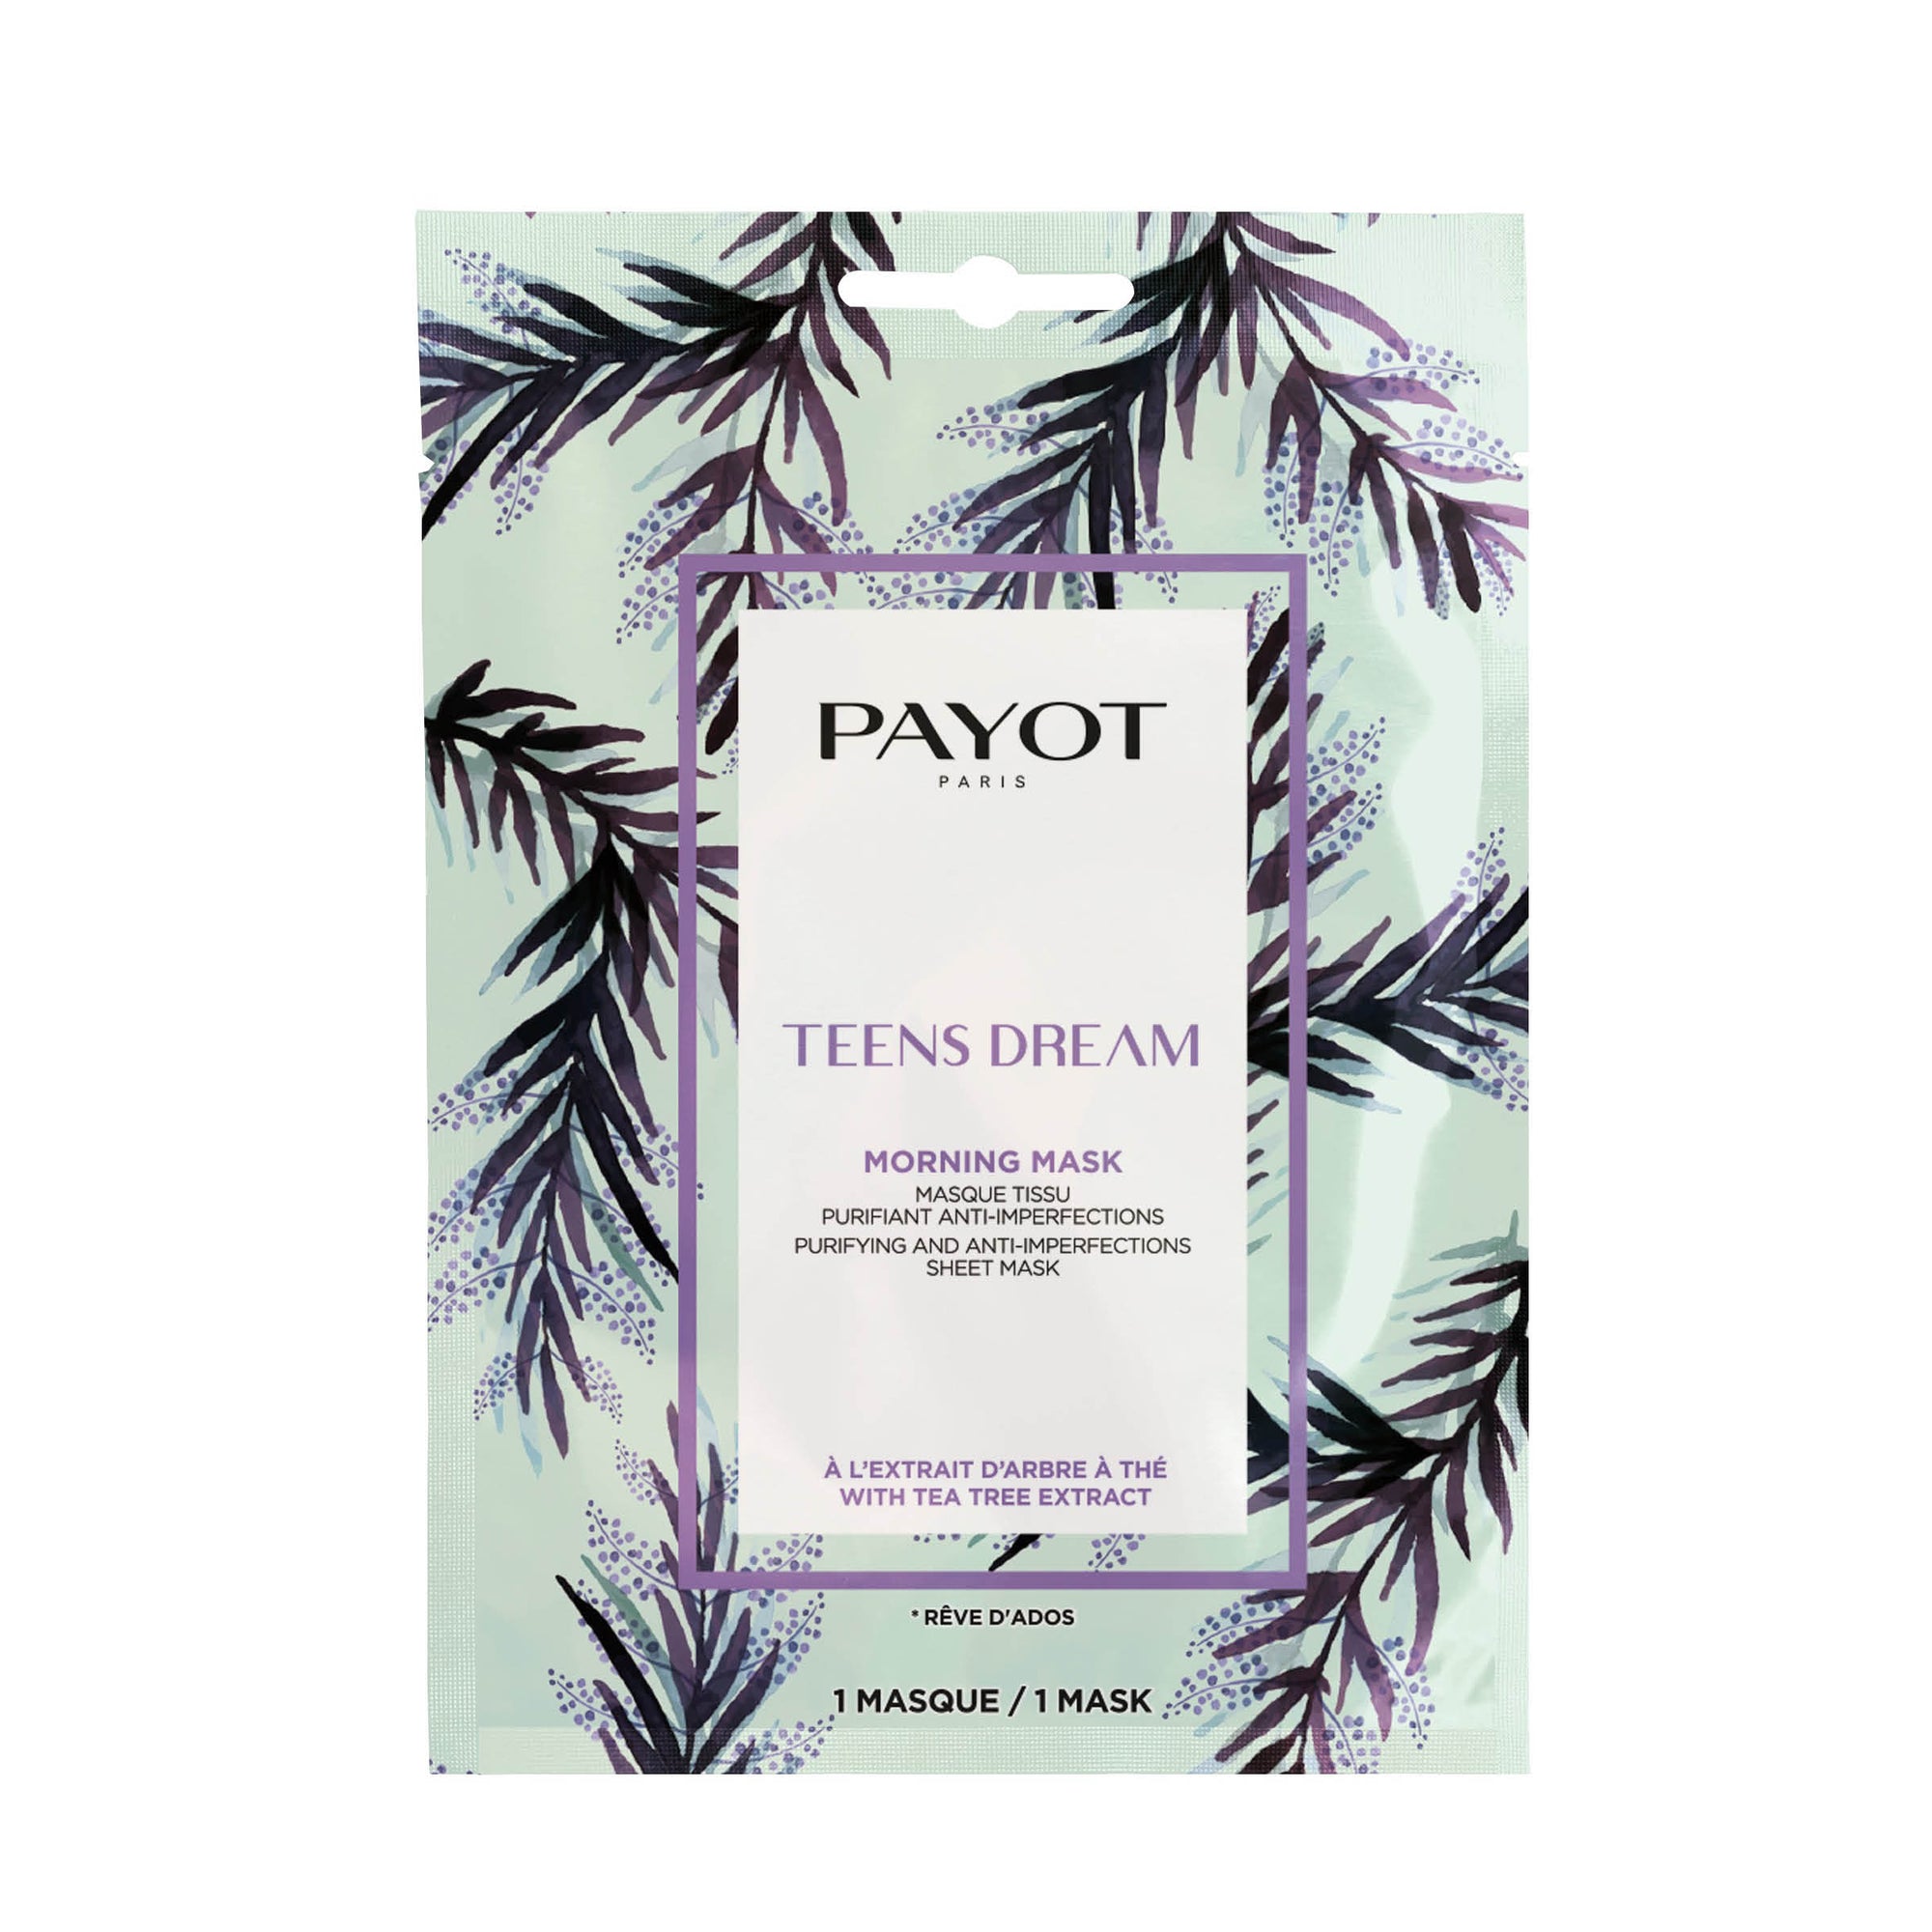 Payot Teen Dream Purifying & Anti-Imperfection Morning Mask